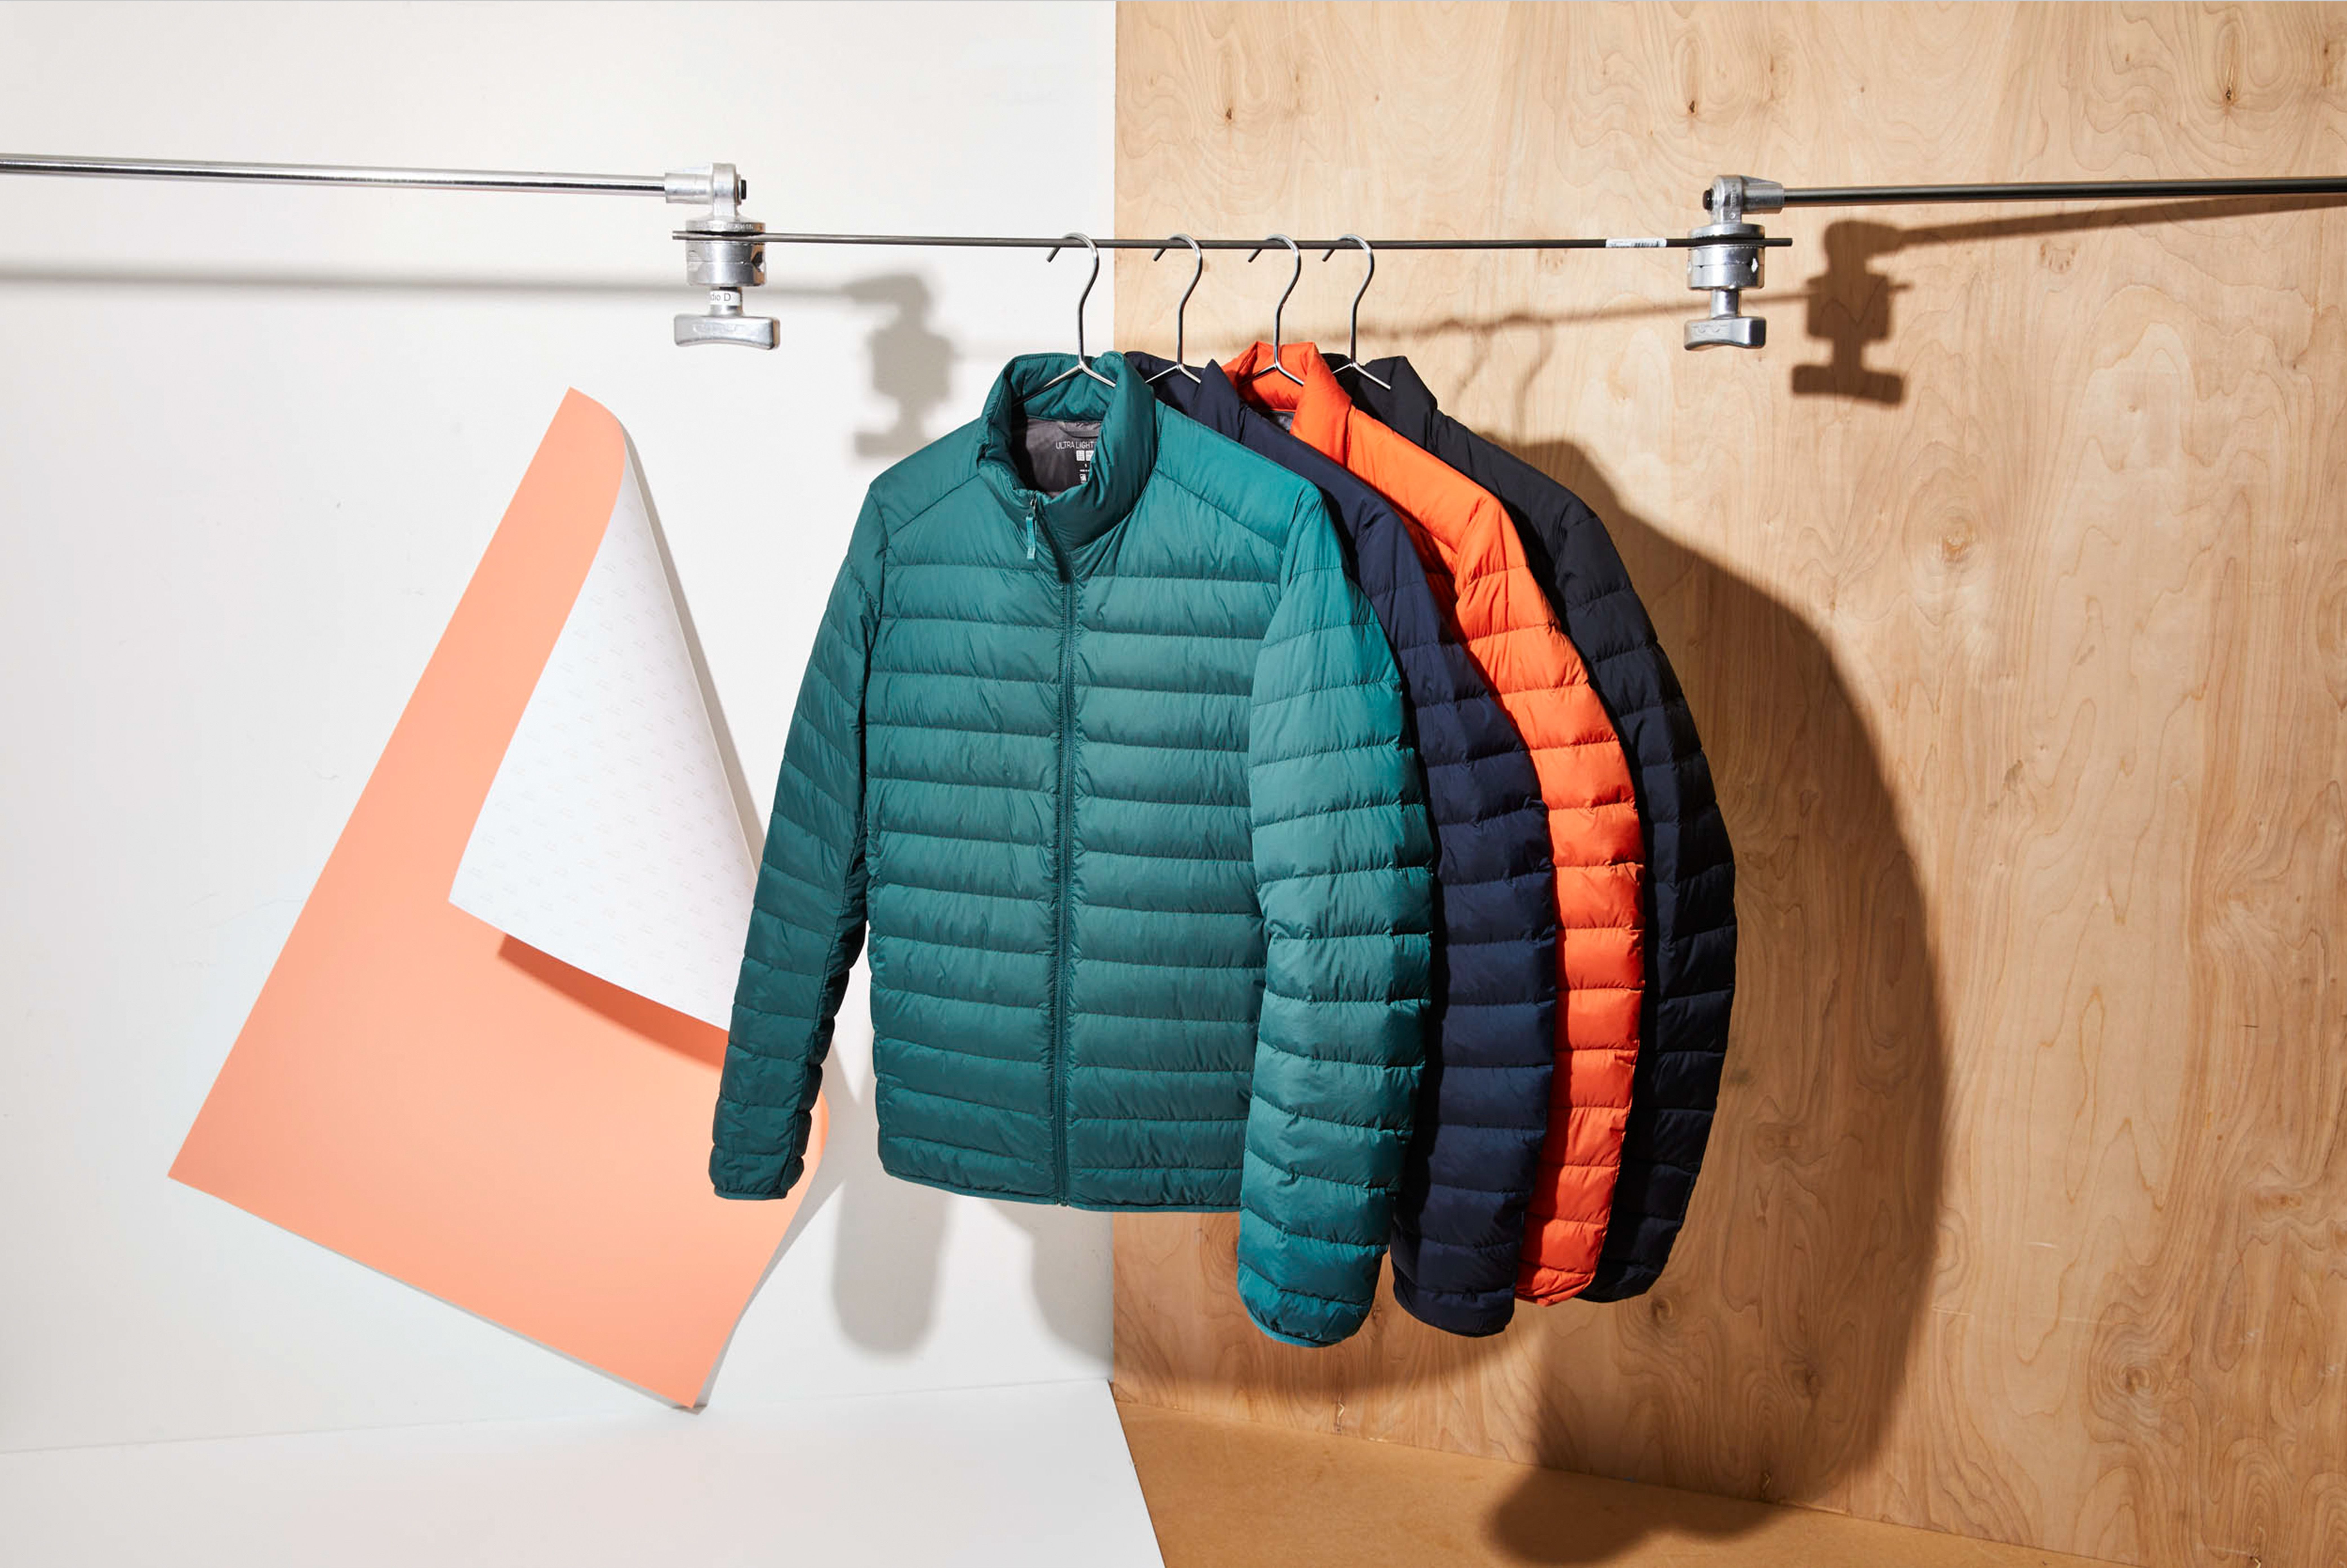 Uniqlo Ultra Light Down Review The Winter Layering Staple You Need   StyleCaster